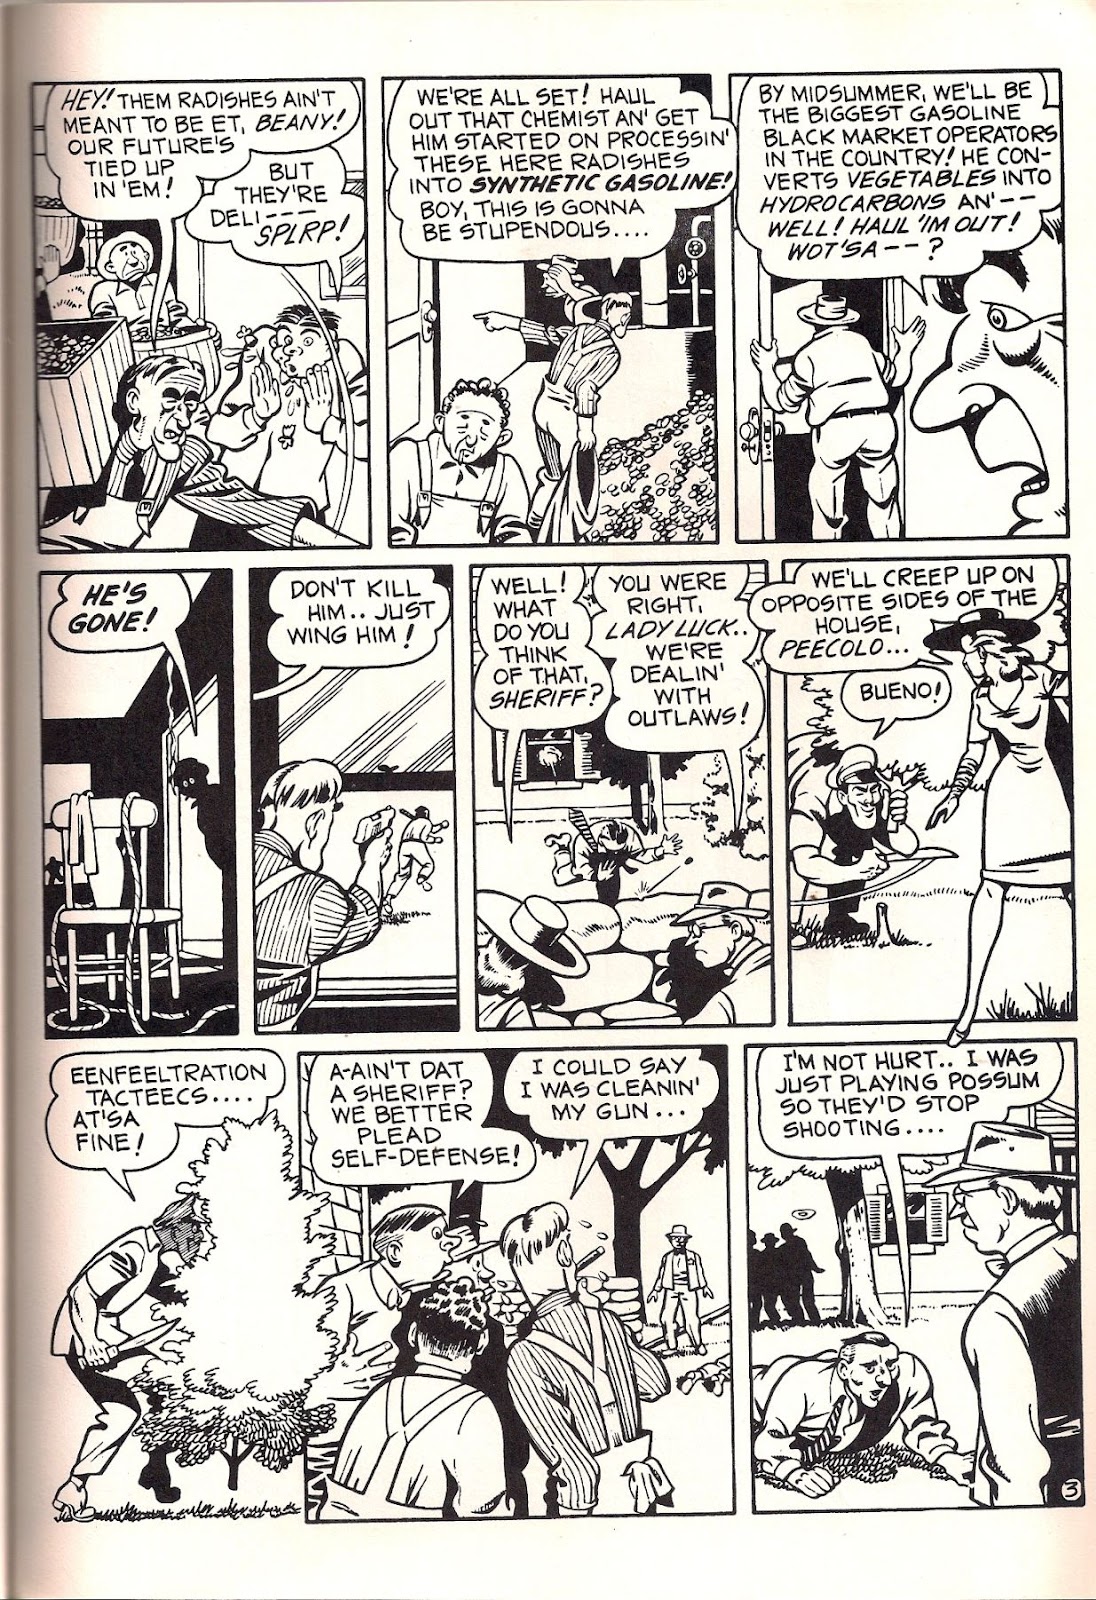 Lady Luck (1980) issue 2 - Page 14